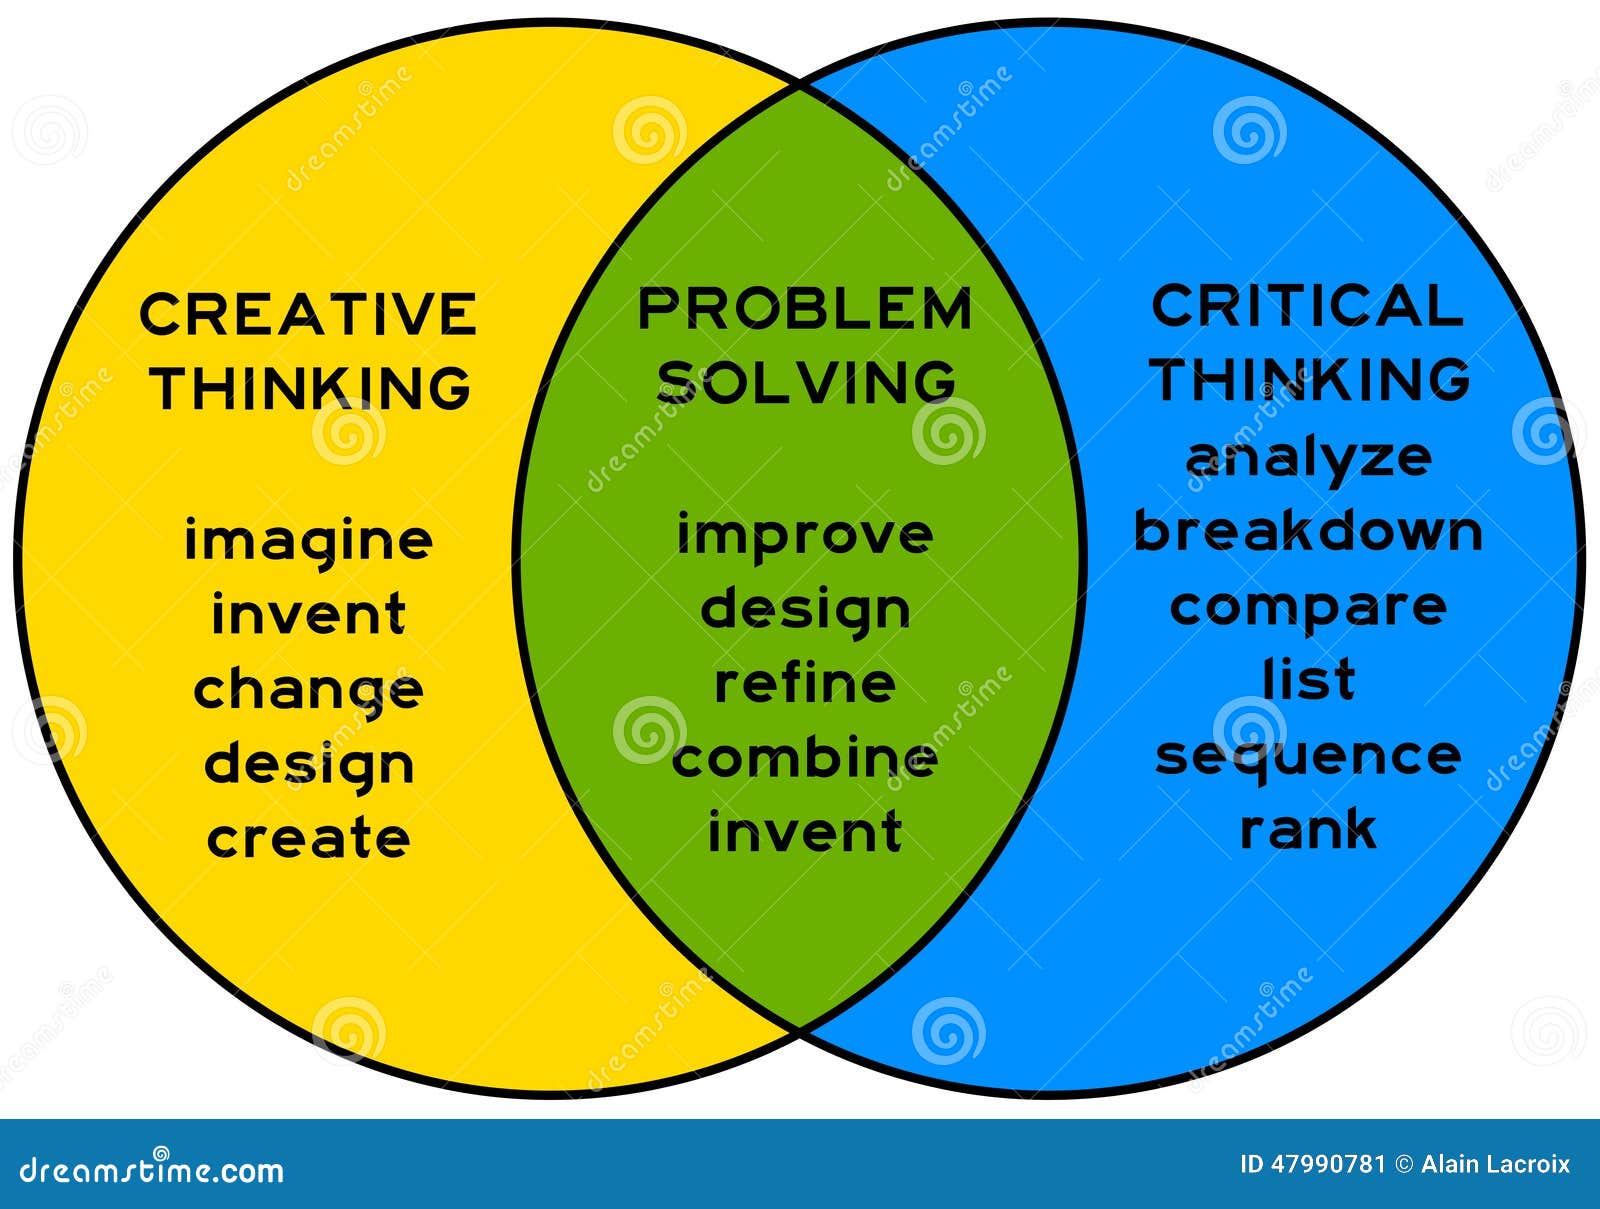 Problem solving and critical thinking skills